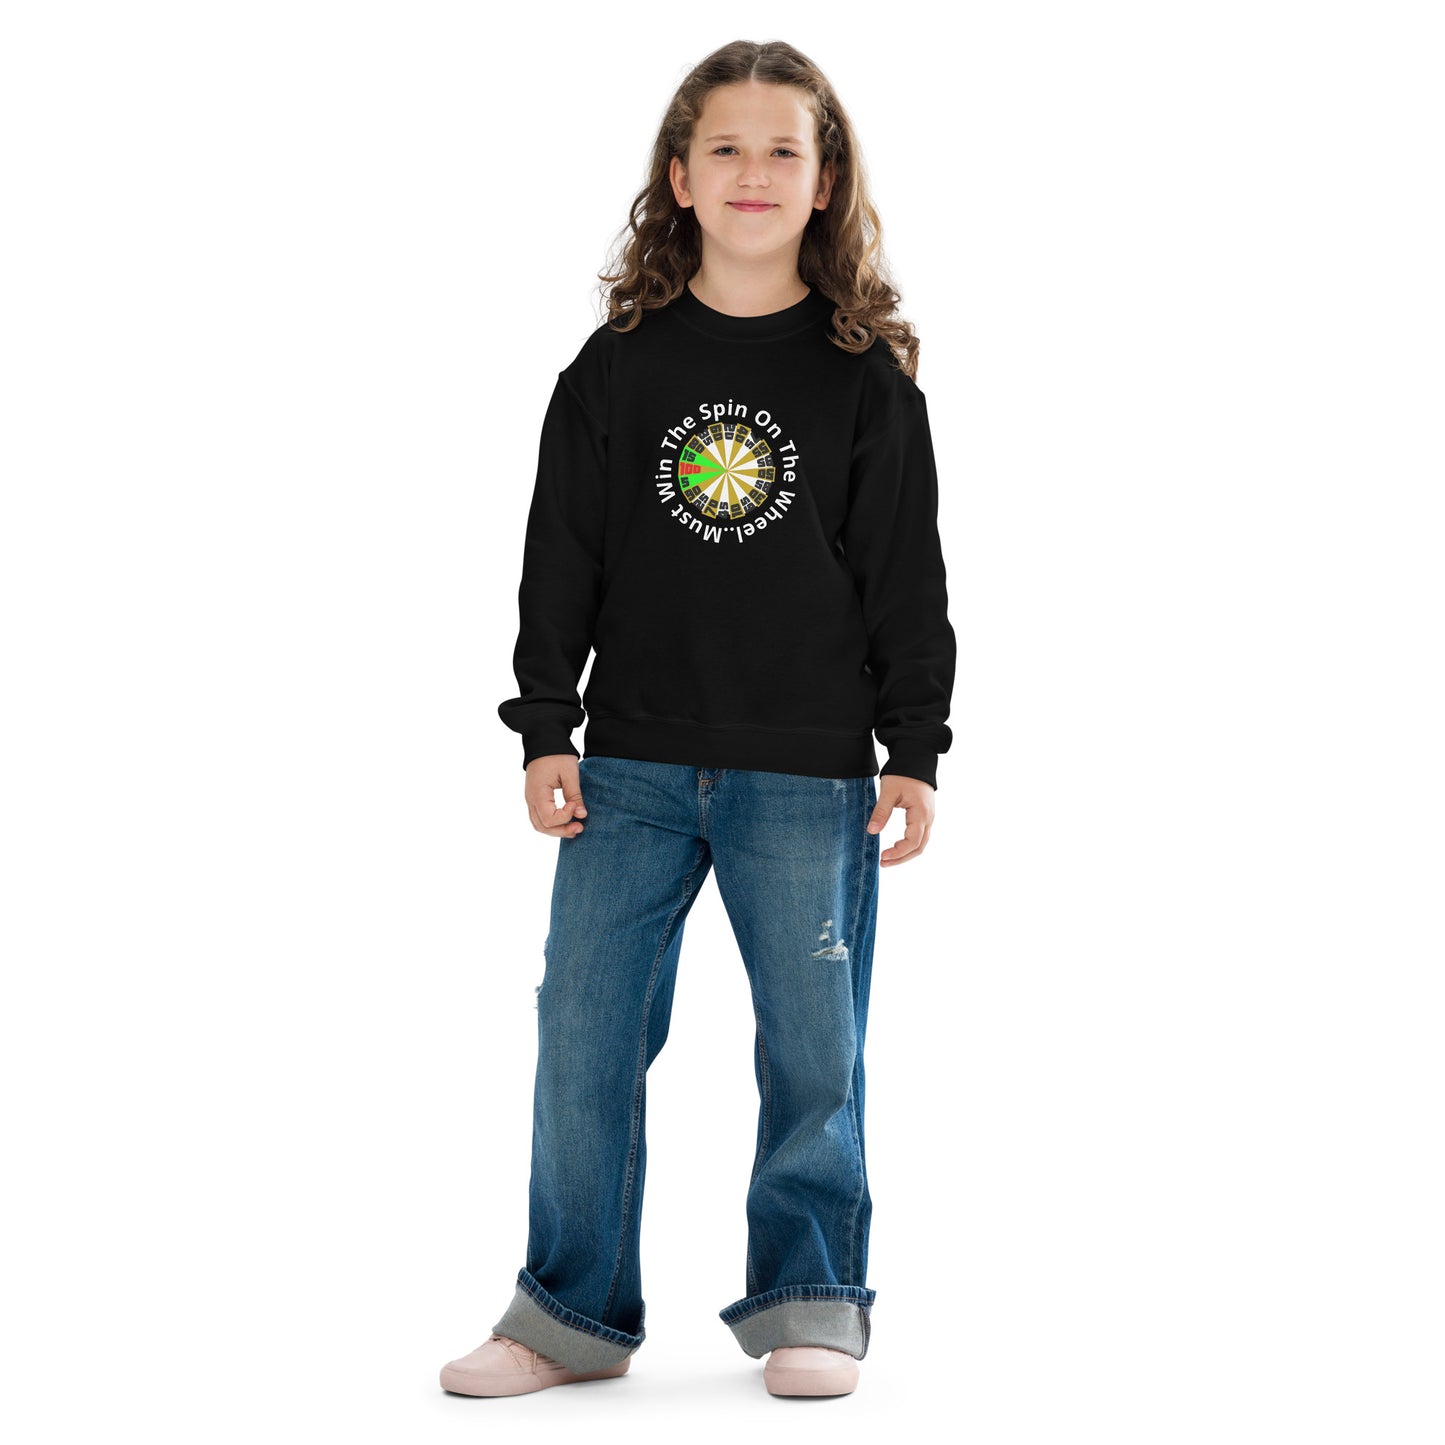 Youth crewneck sweatshirt - The Price Is Right - Spin The Wheel